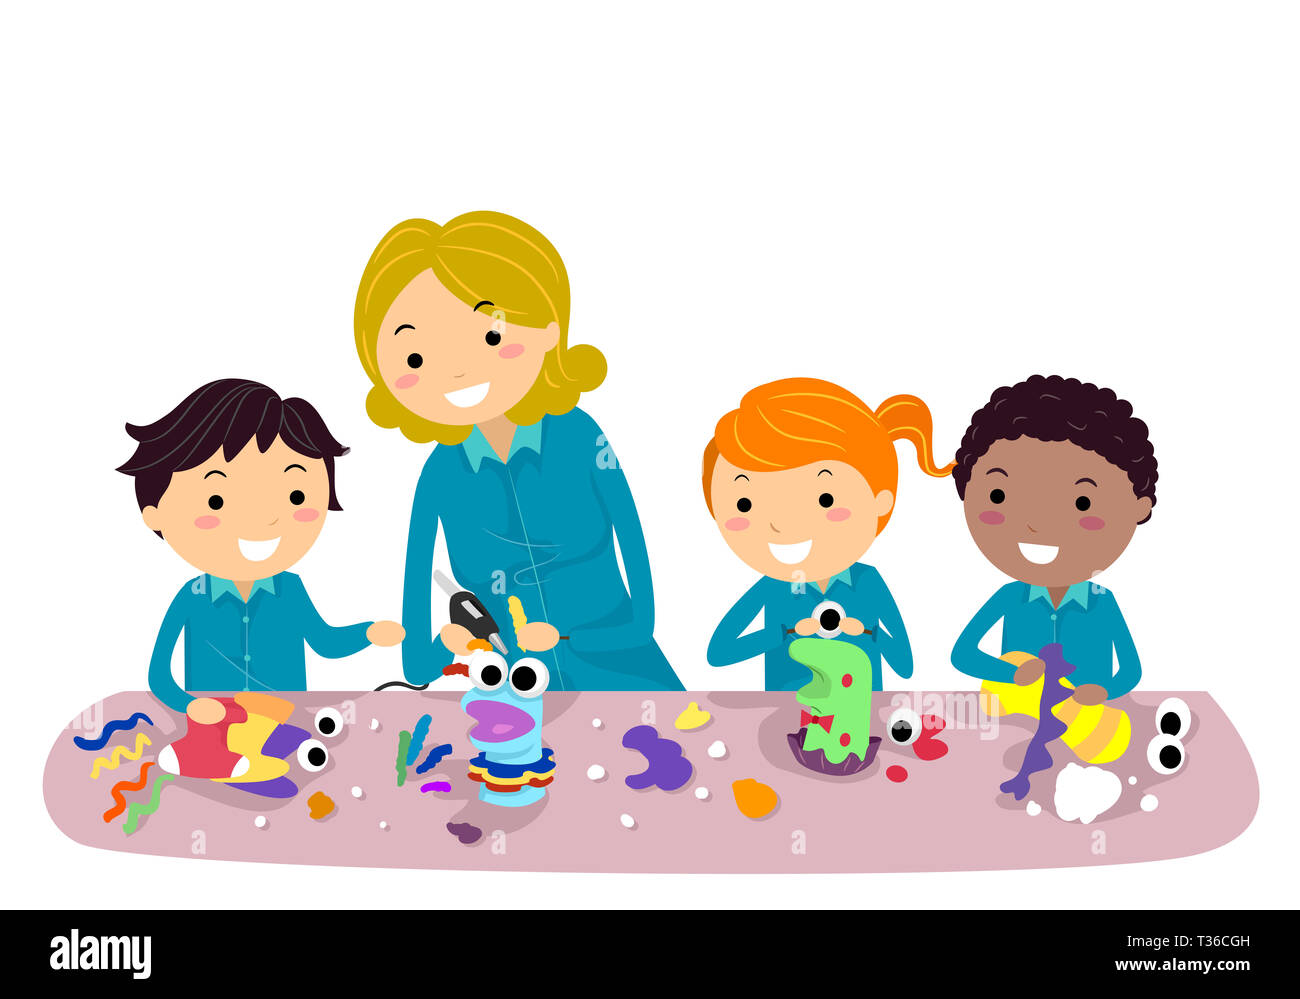 Illustration of Stickman Kids Making Cute Sock Puppets with Teacher in Class Stock Photo